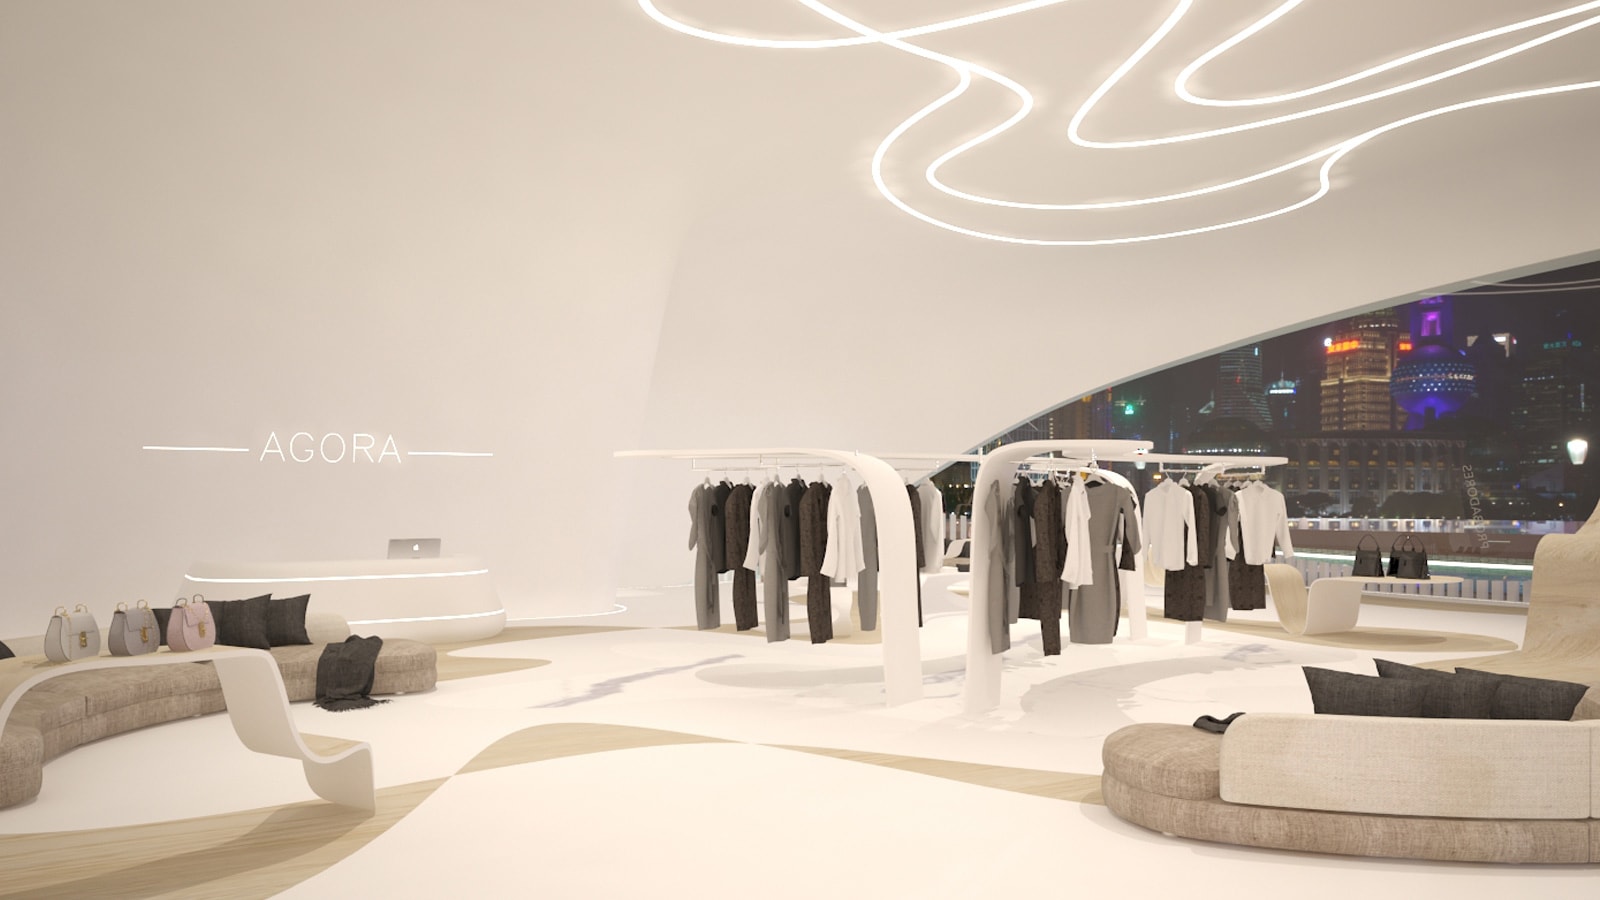 The 12th Porcelanosa Awards Finalists: Ágora, a luxury boutique in New York